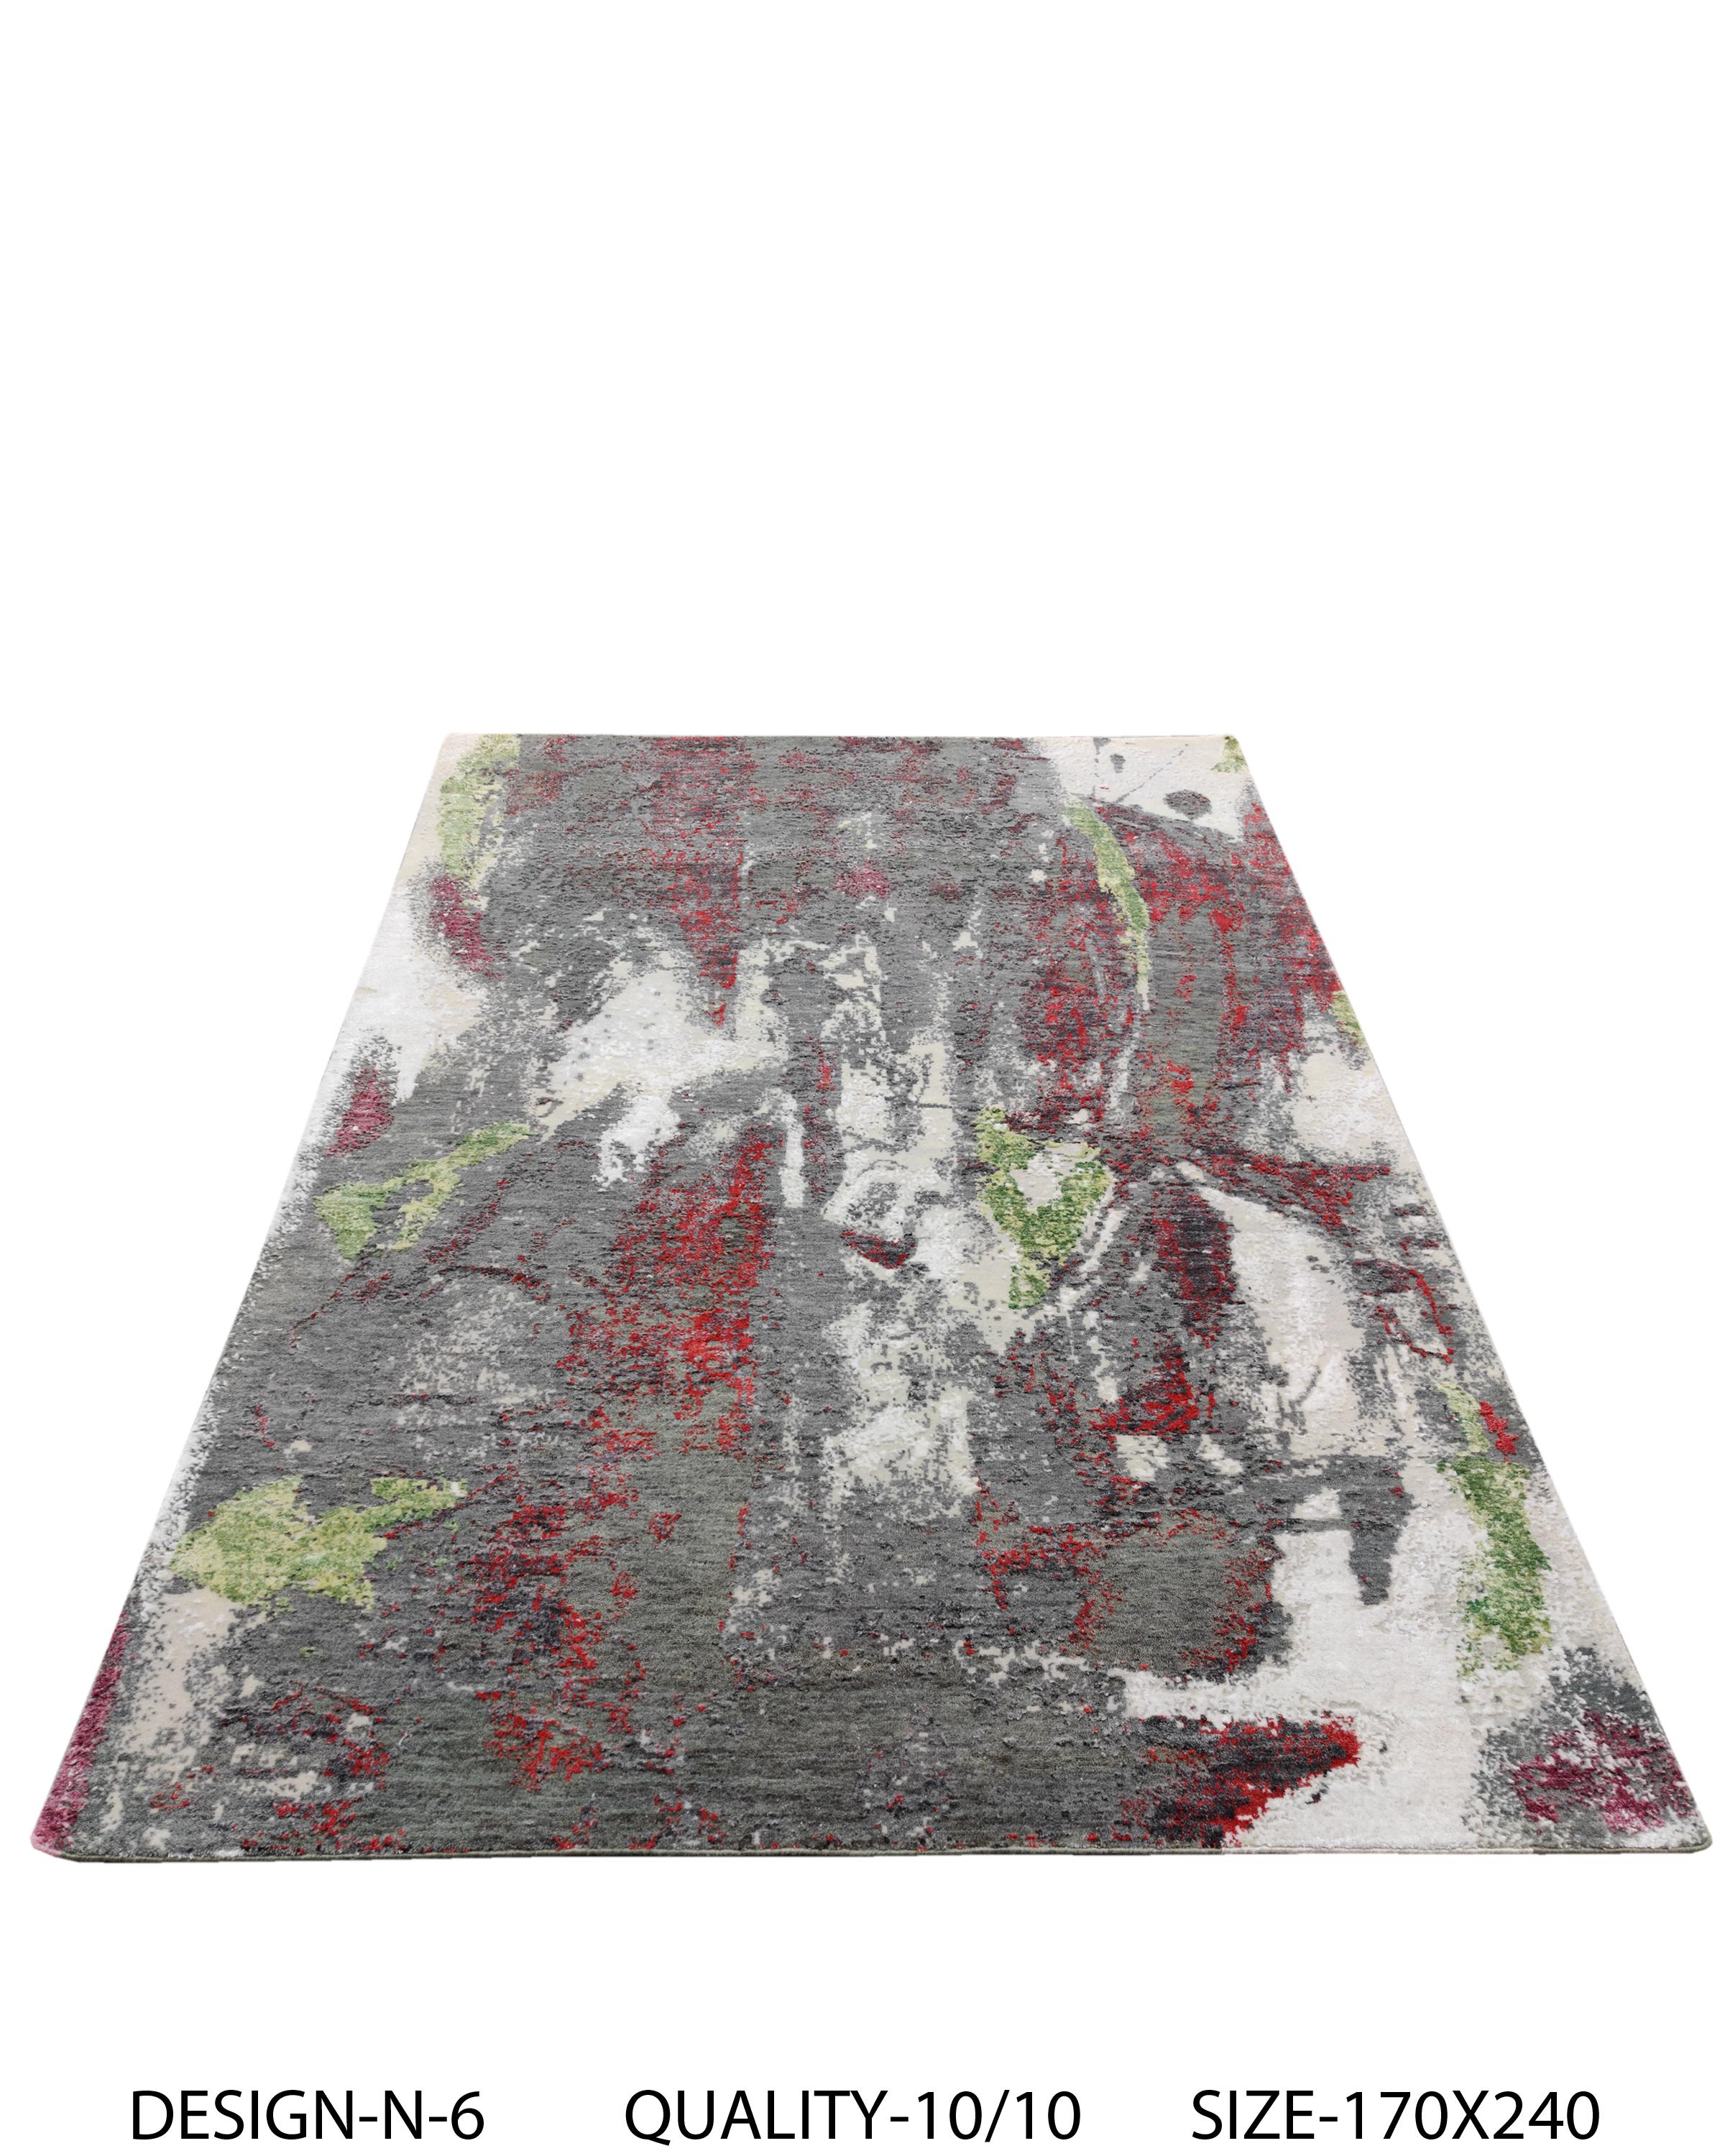 A new addition to the handmade rugs in the abstract rug line by Rug & Kilim, this 5'8